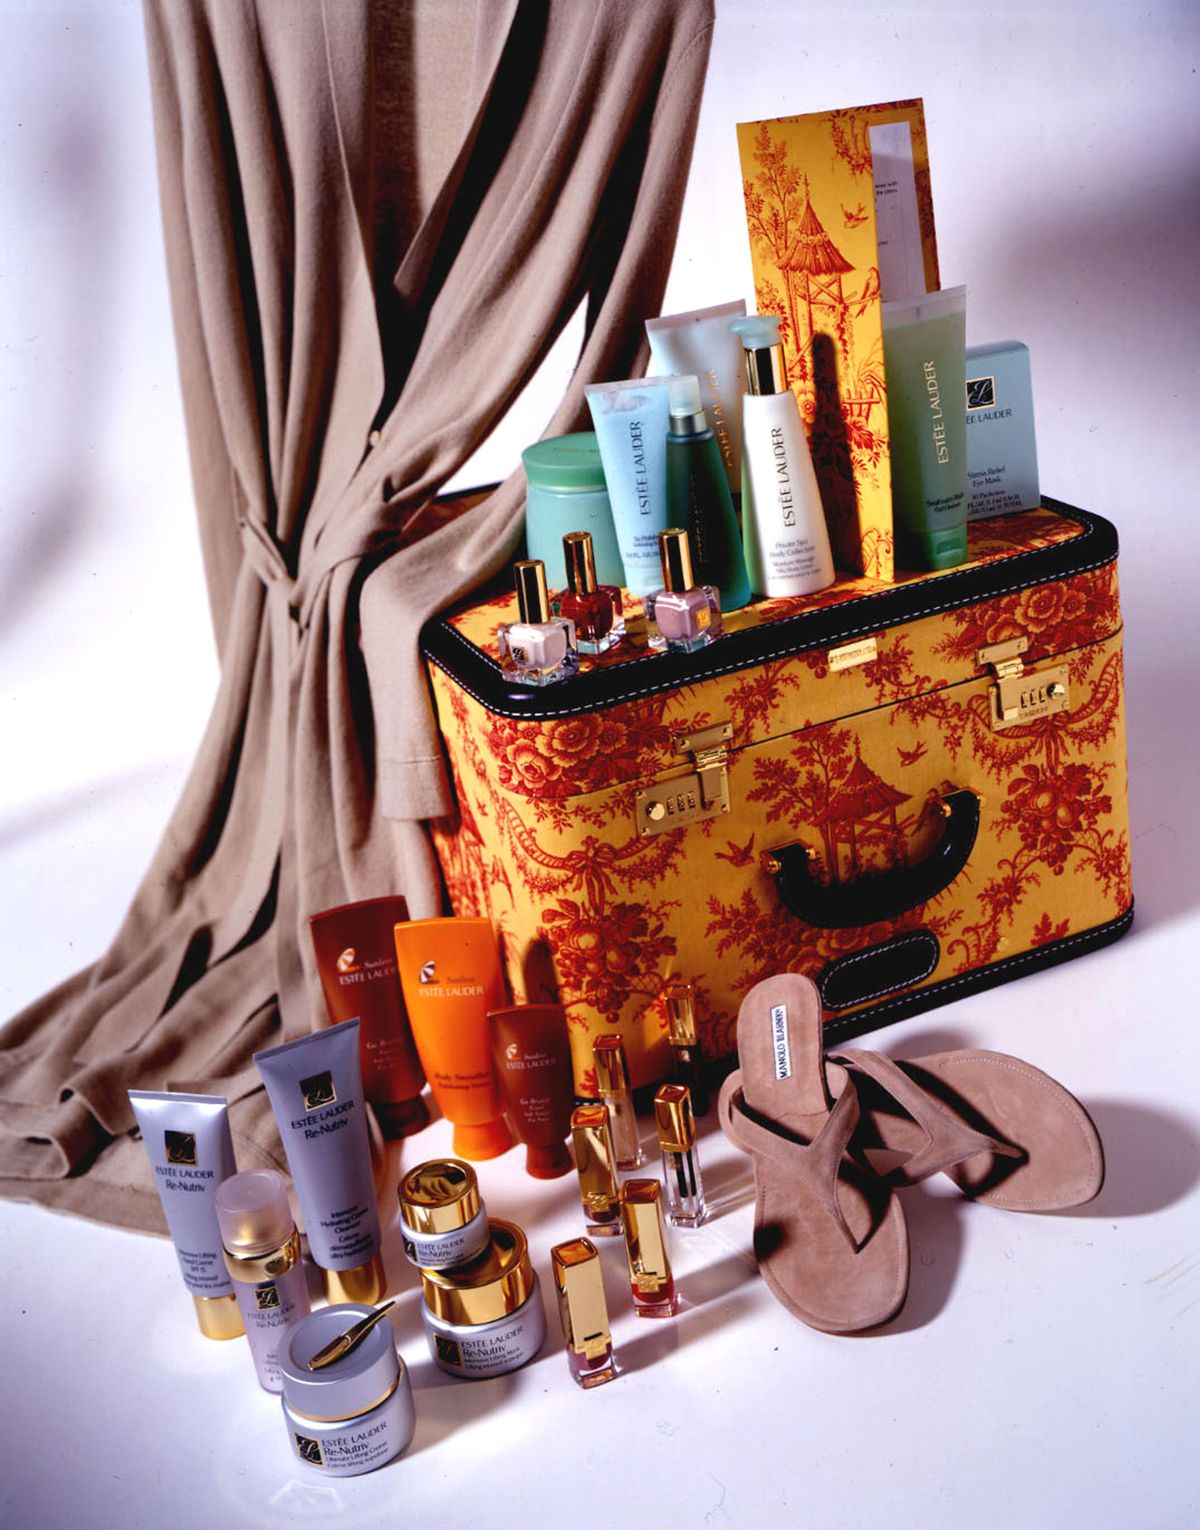 402224 04: Estee Lauder will present the "mobile" Oscar Spa to the Best Actress and Supporting Actress nominees. The gift includes a custom designed T. Anthony toile suitcase, $1,500 of new Estee Lauder products, a TSE cashmere robe and Manolo Blahnik suede sandals.